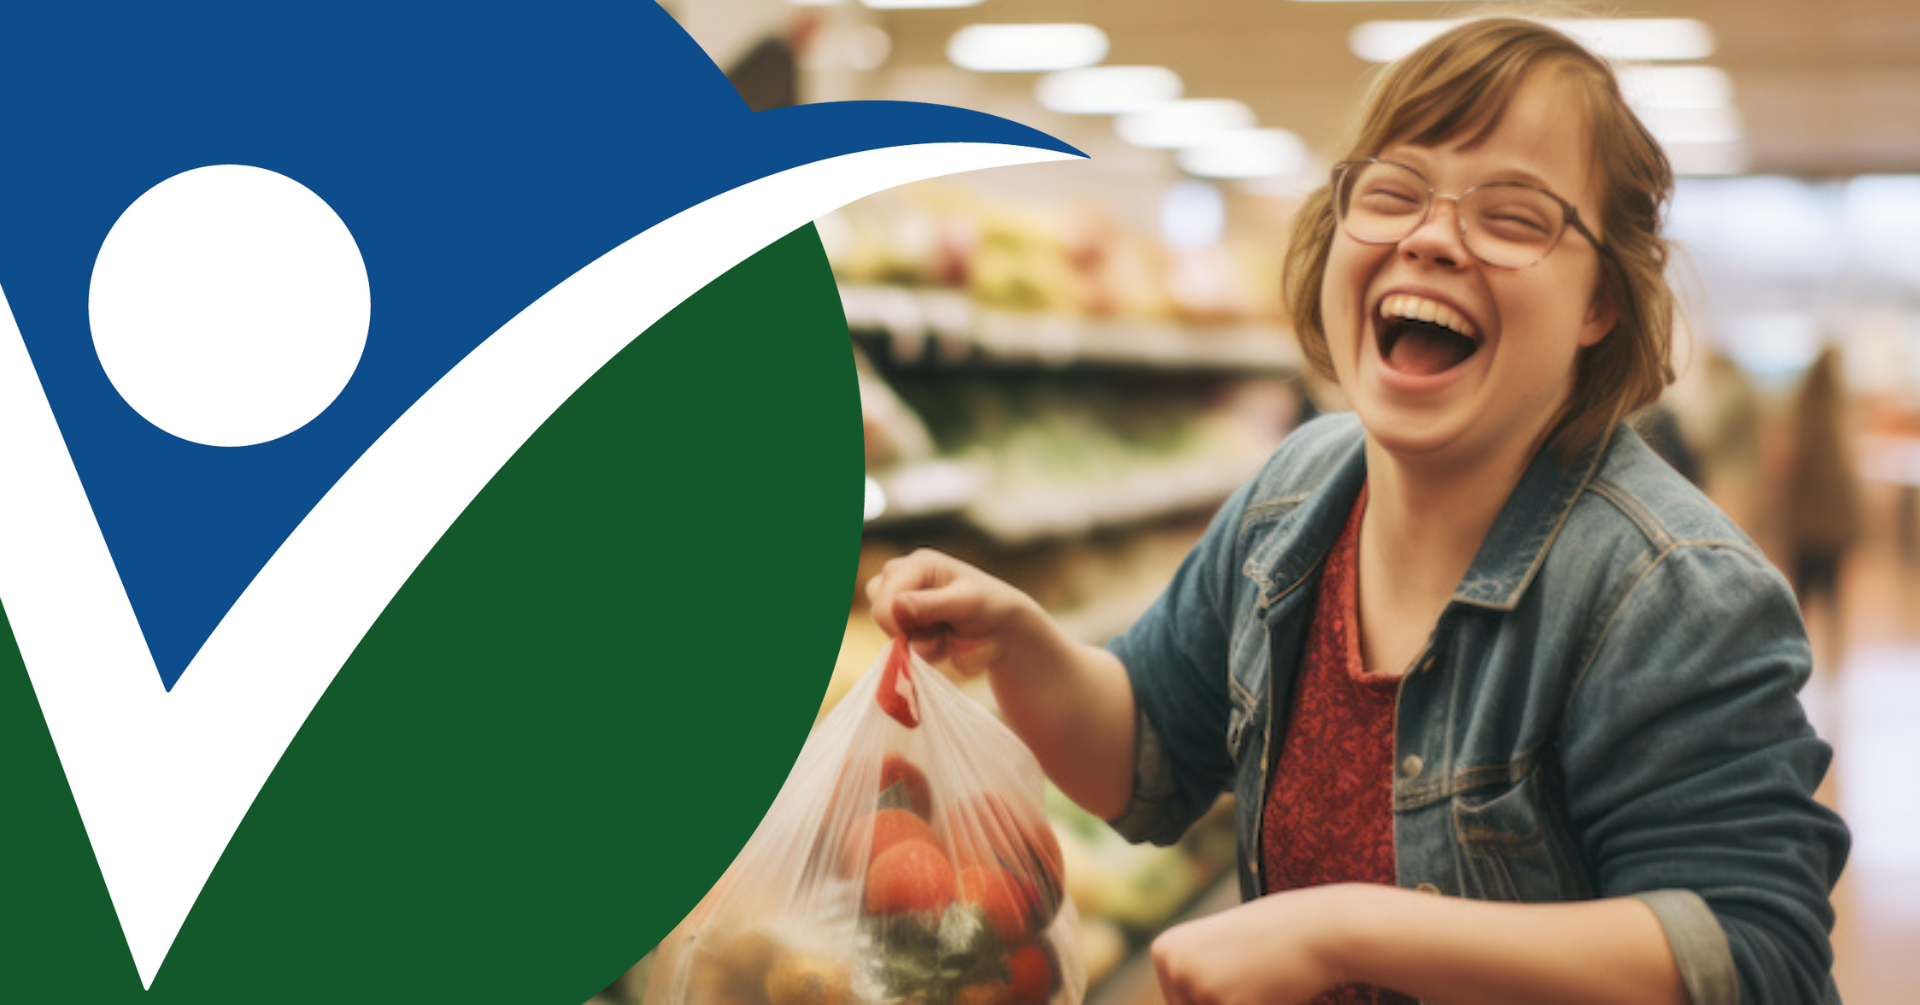 NNCIL logo next to a young woman laughing while shopping in the grocery store